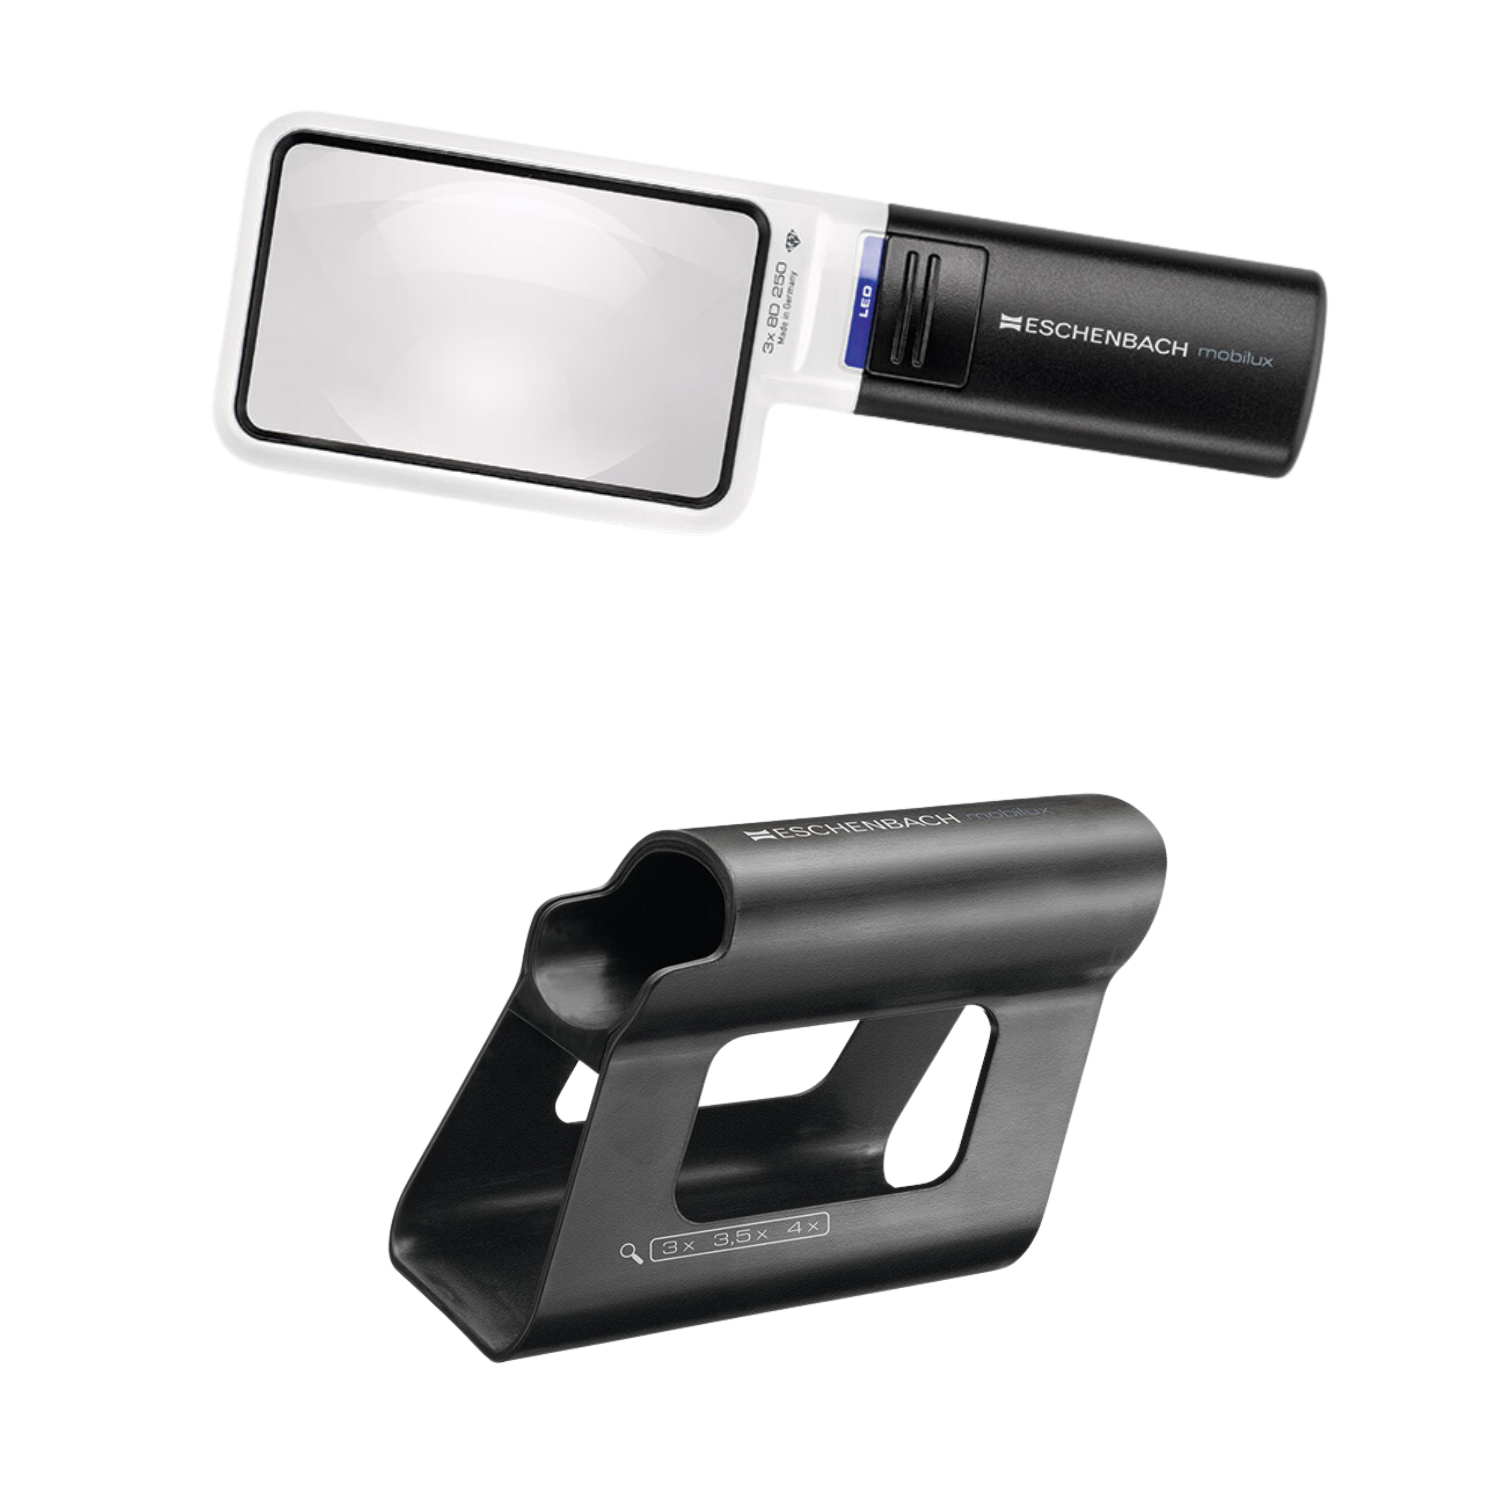 Image of the rectangular 3x Mobilux handheld magnifier with Mobase stand from Eschenbach.